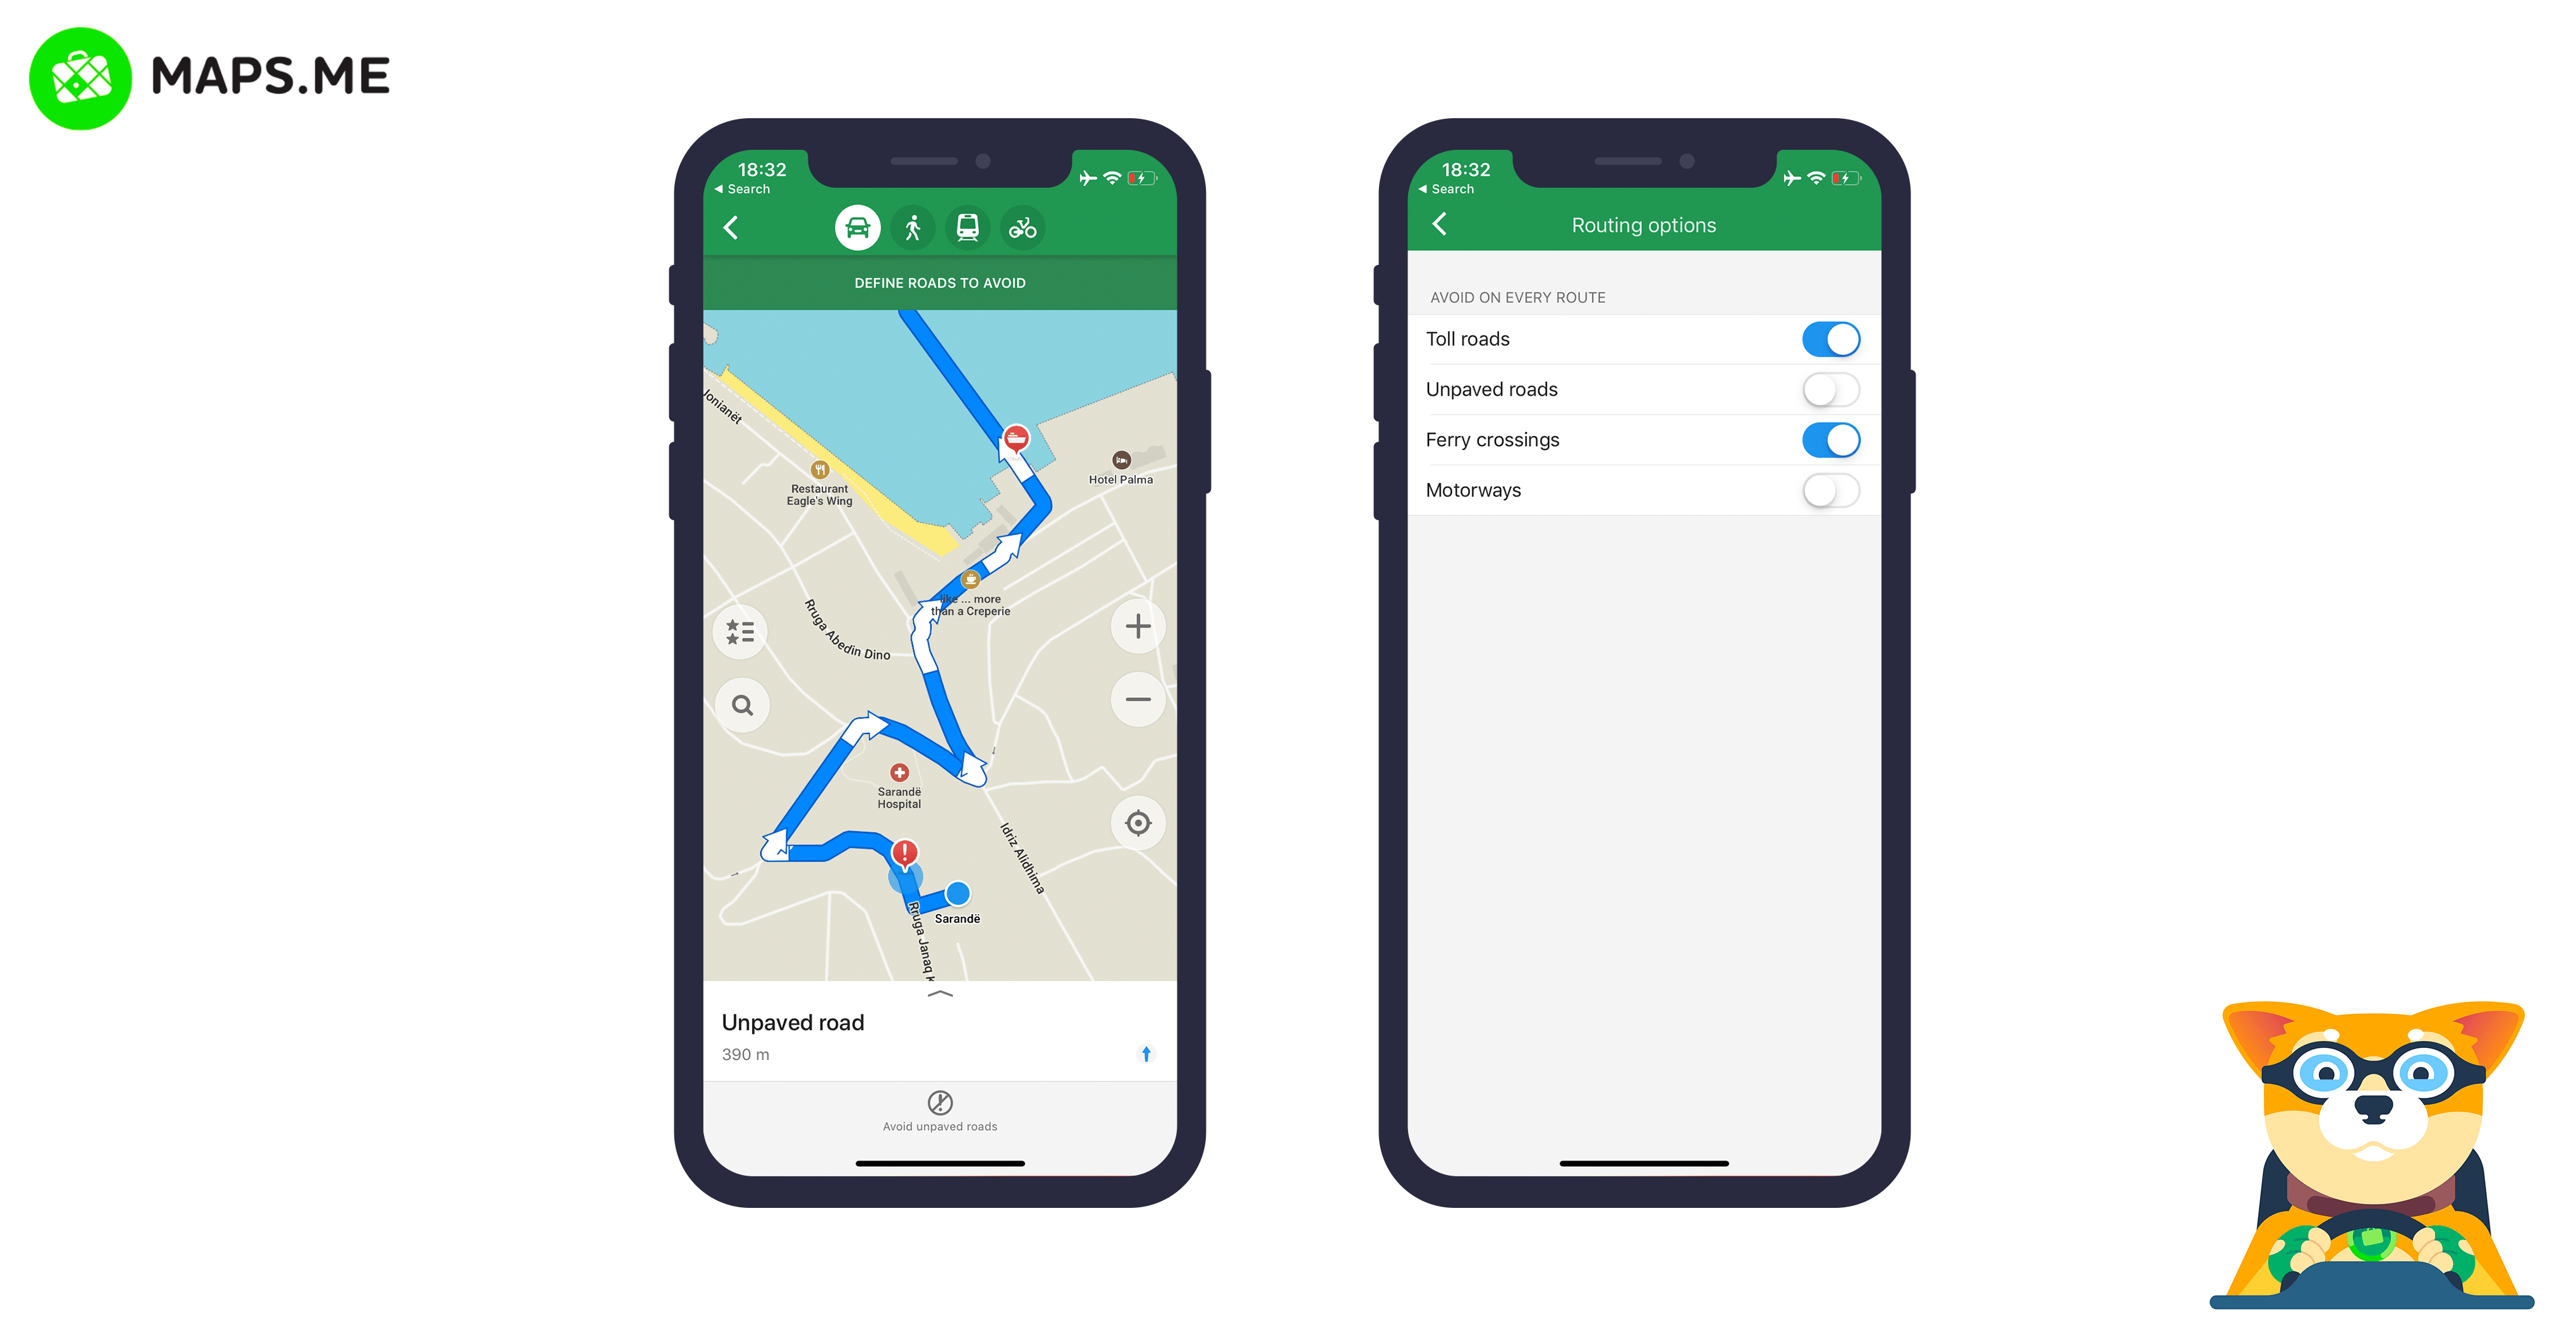 Route interface